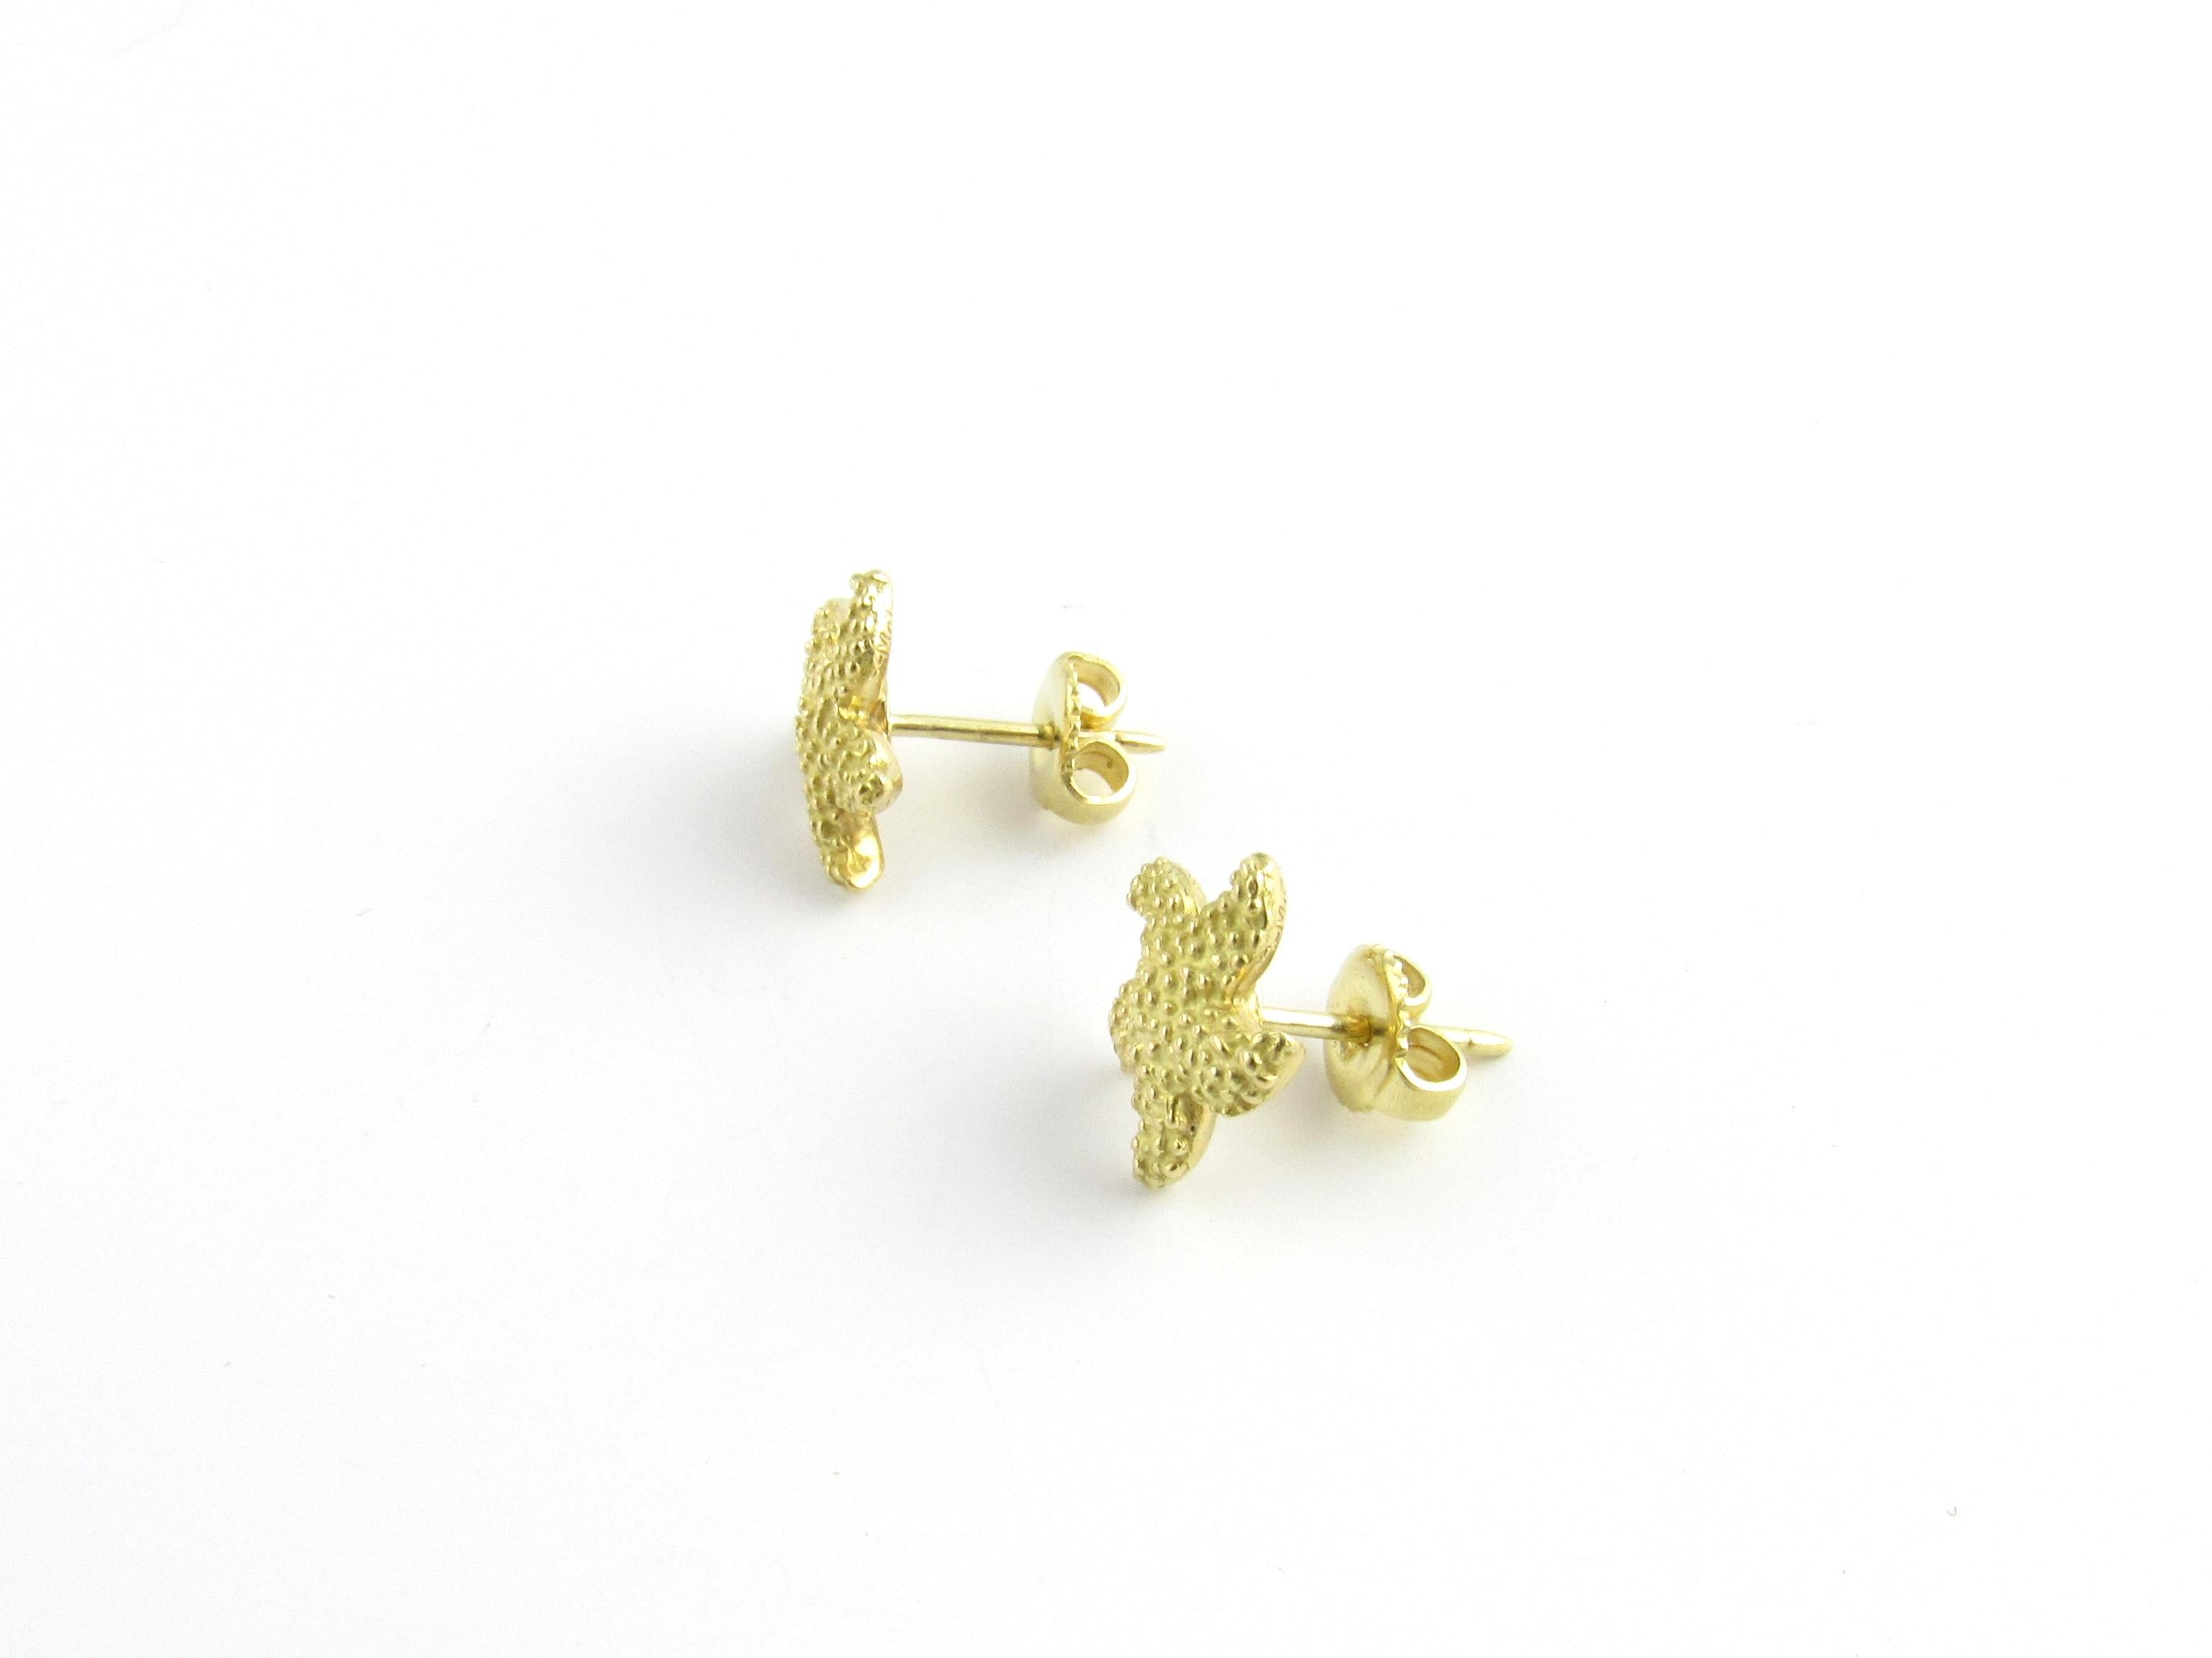 Tiffany & Co. 18K Yellow Gold Bumpy Starfish Stud Earrings

These vintage authentic Tiffany earrings are approx. 13 mm in diameter and 15 mm from end to end.

3.4 g / 2.1 dwt

Stamped Tiffany & Co. on back of starfish

Backs are 18K Yellow Gold but